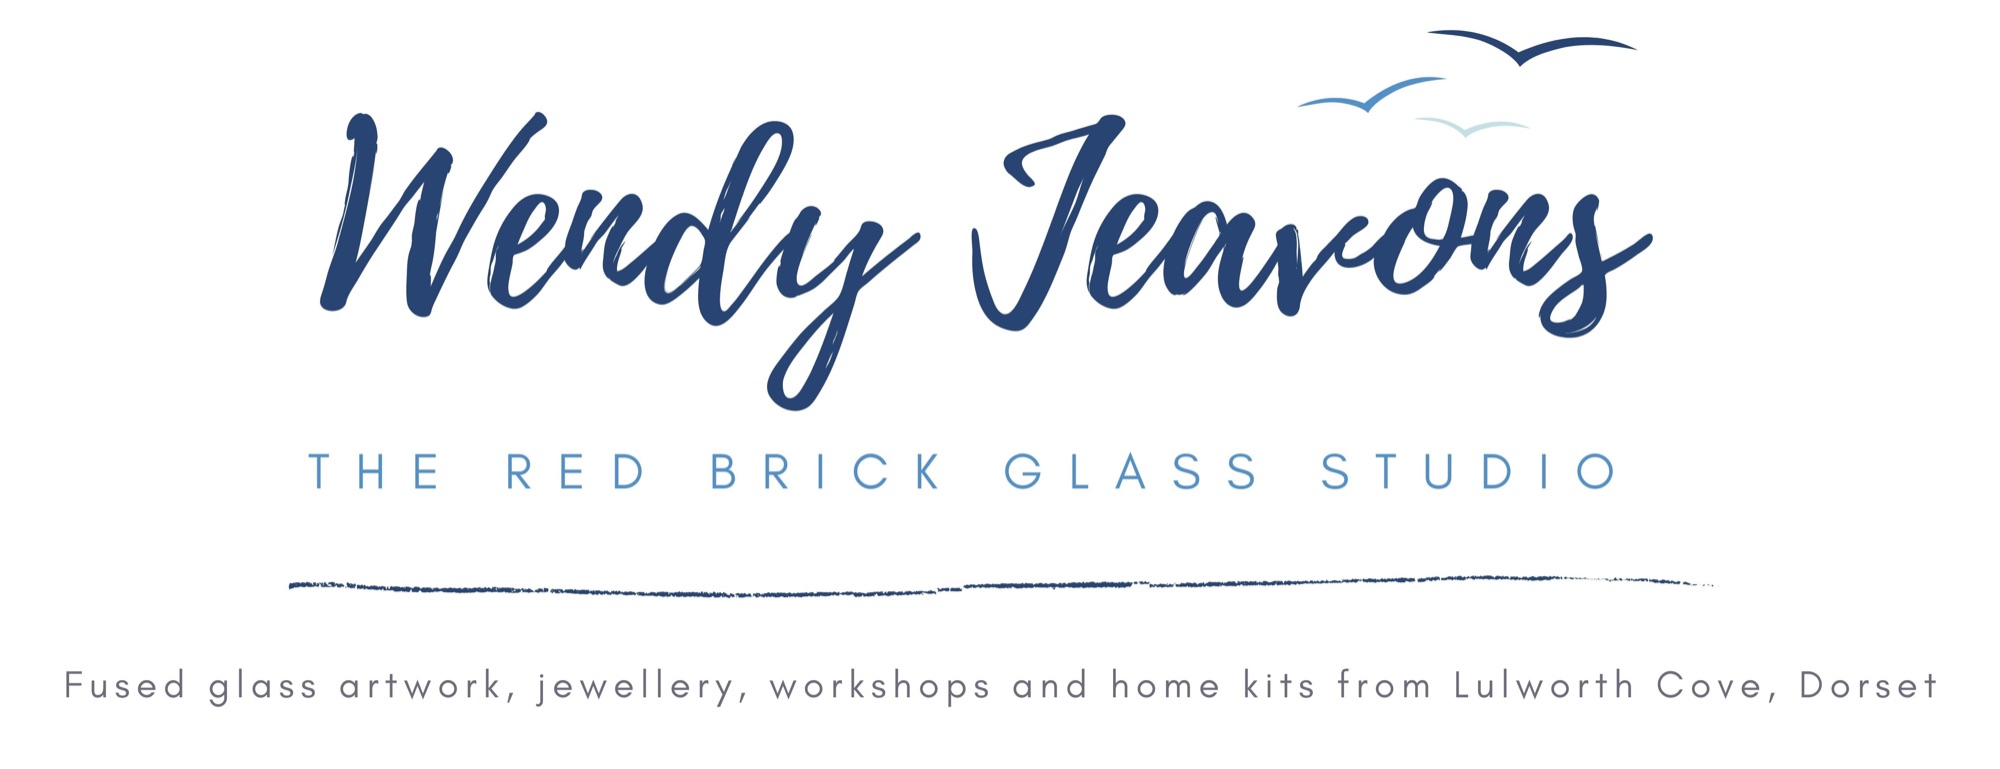 Red Brick Glass pretty products and wonderful workshops by Wendy Jeavons logo